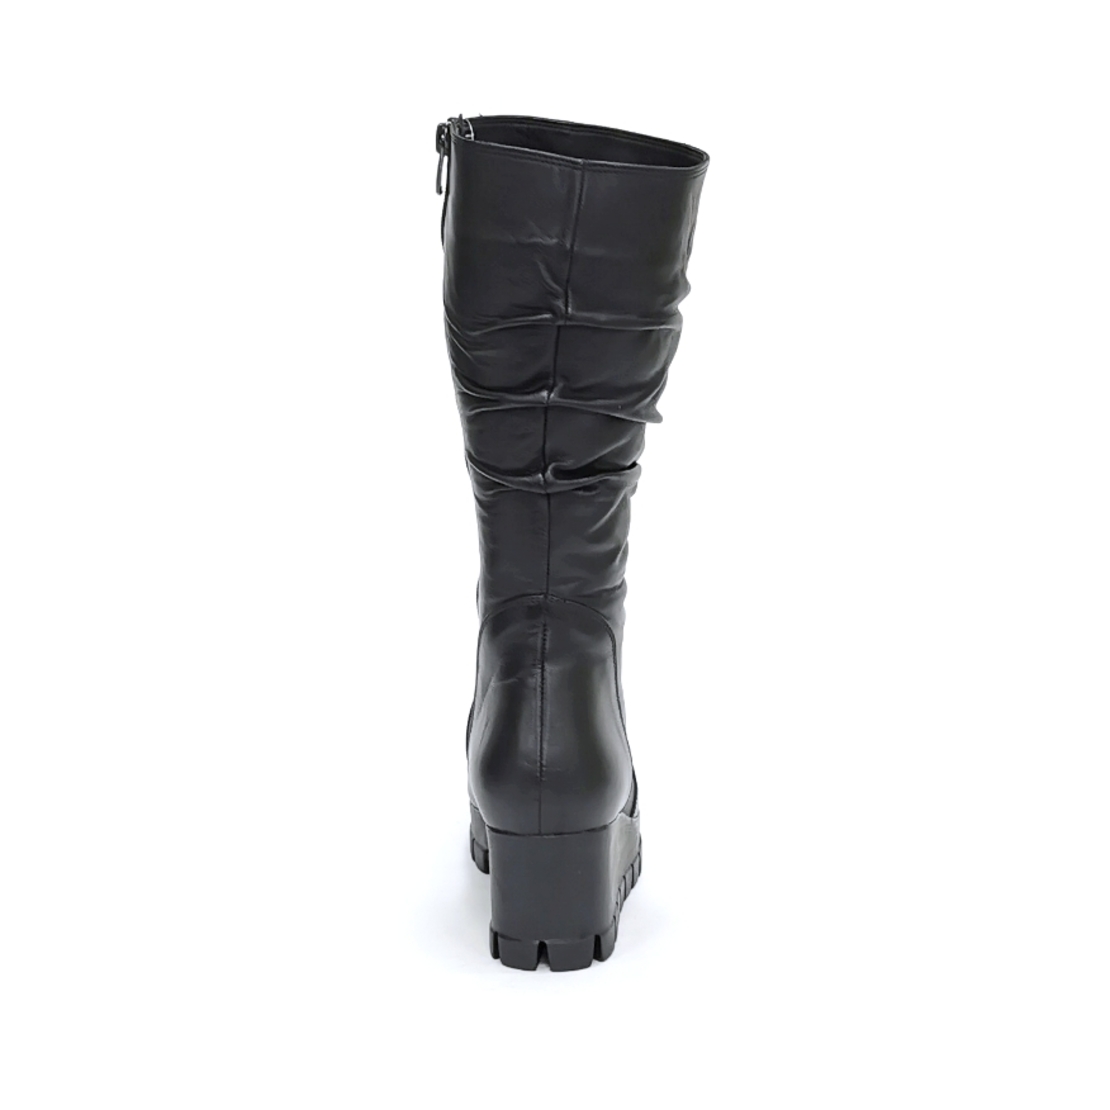 Women's casual boots made of natural leather in black/7360